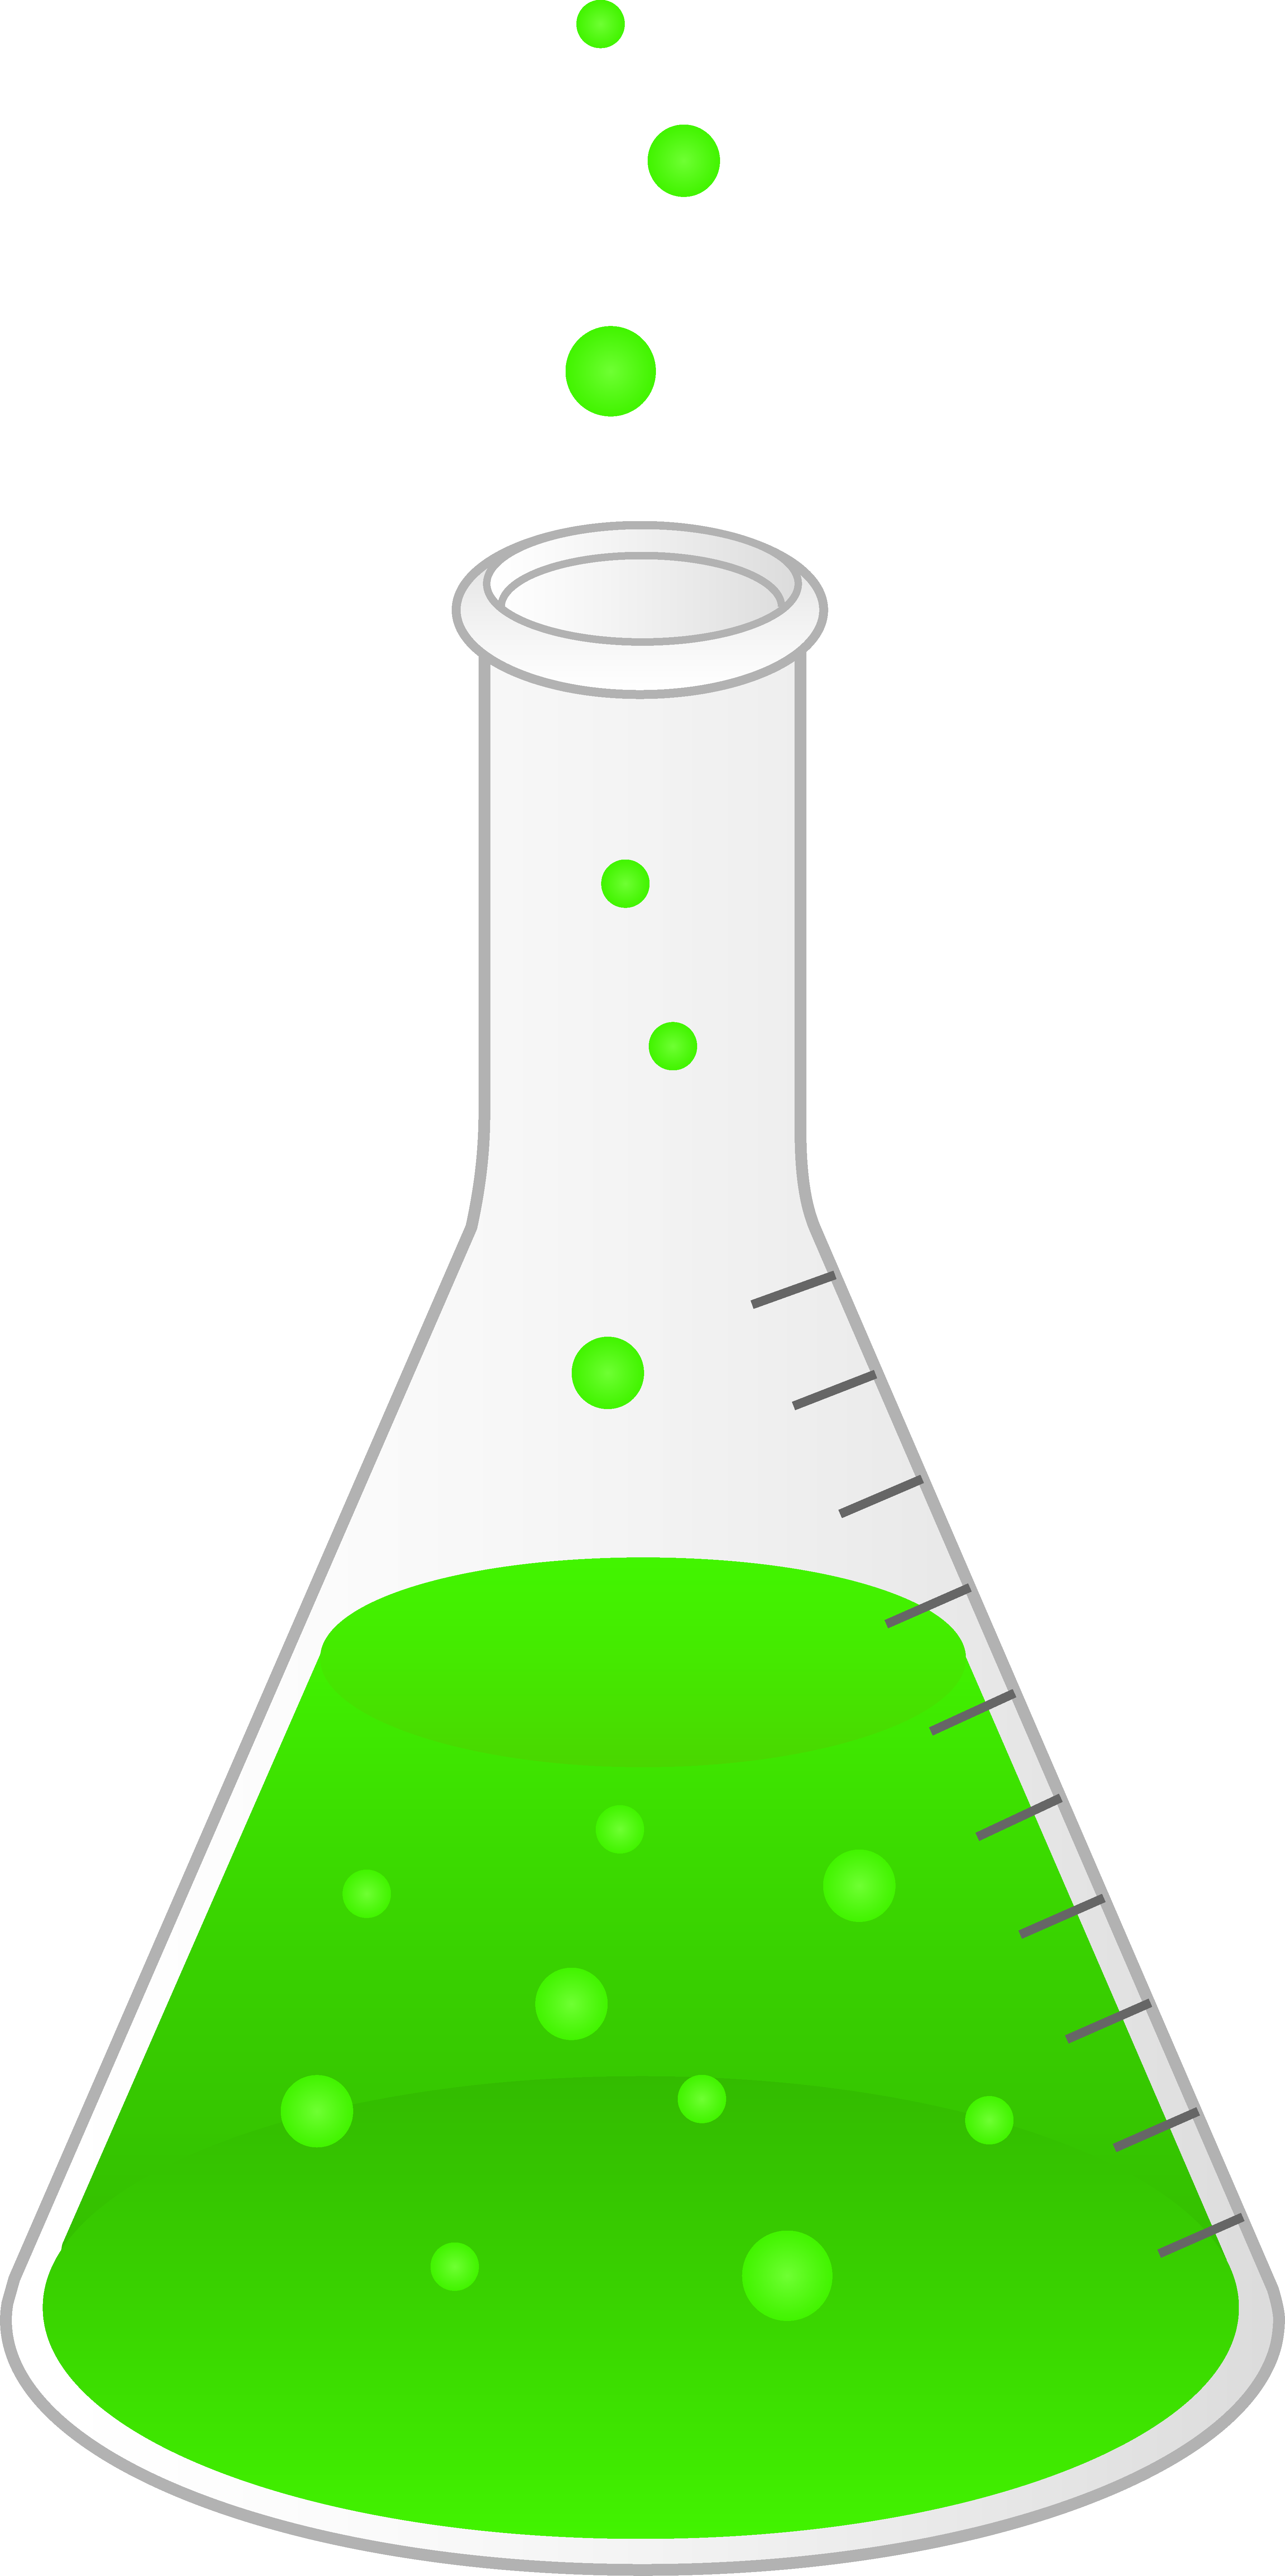 Chemicals clipart flask. Image of beaker chemistry